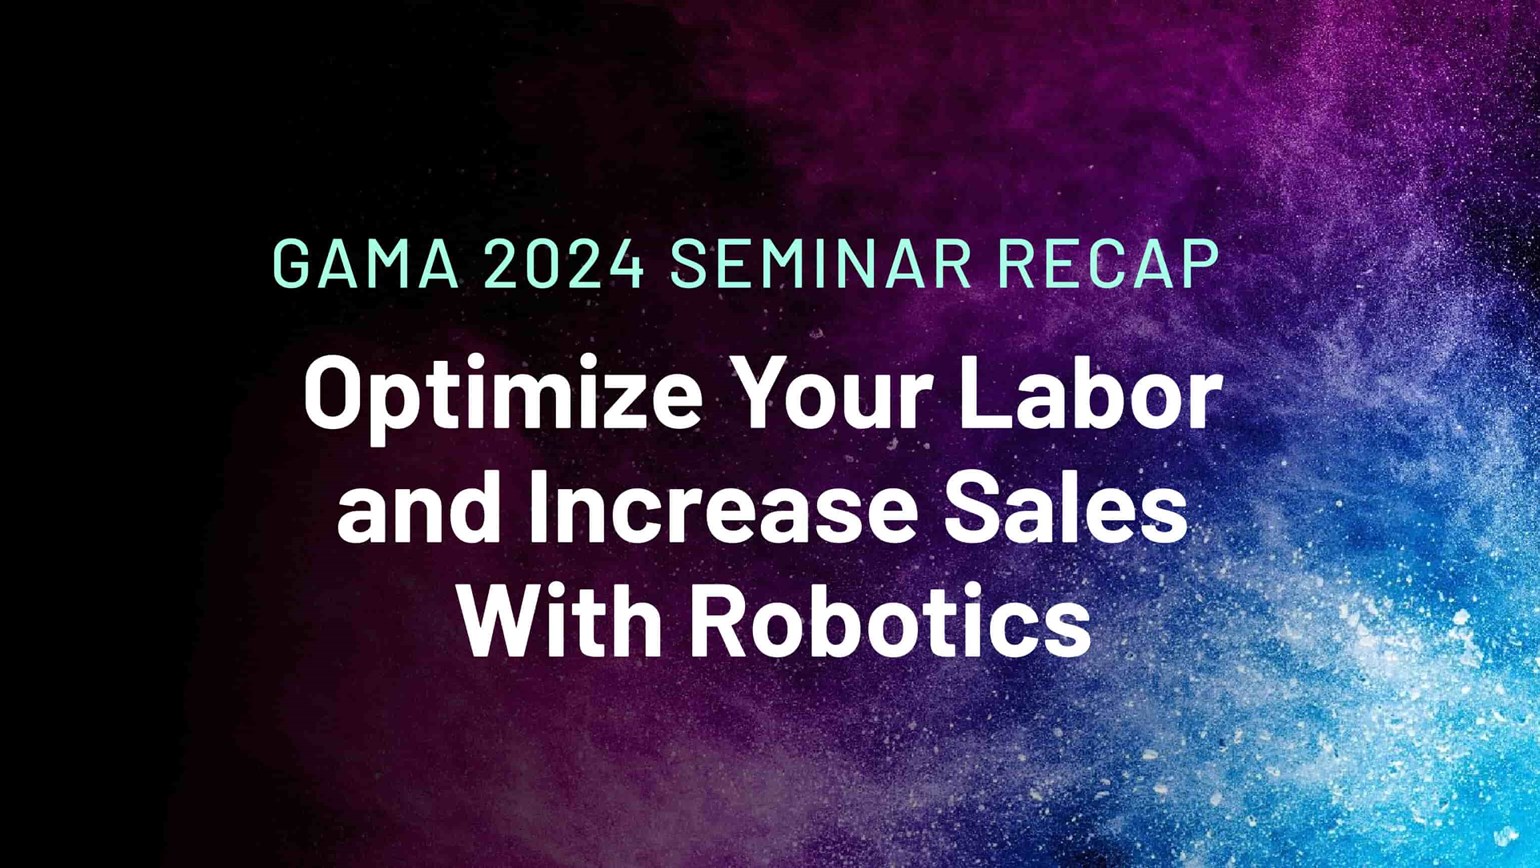 How To Optimize Your Labor and Increase Sales With Robotics – GAMA 2024 Seminar Recap